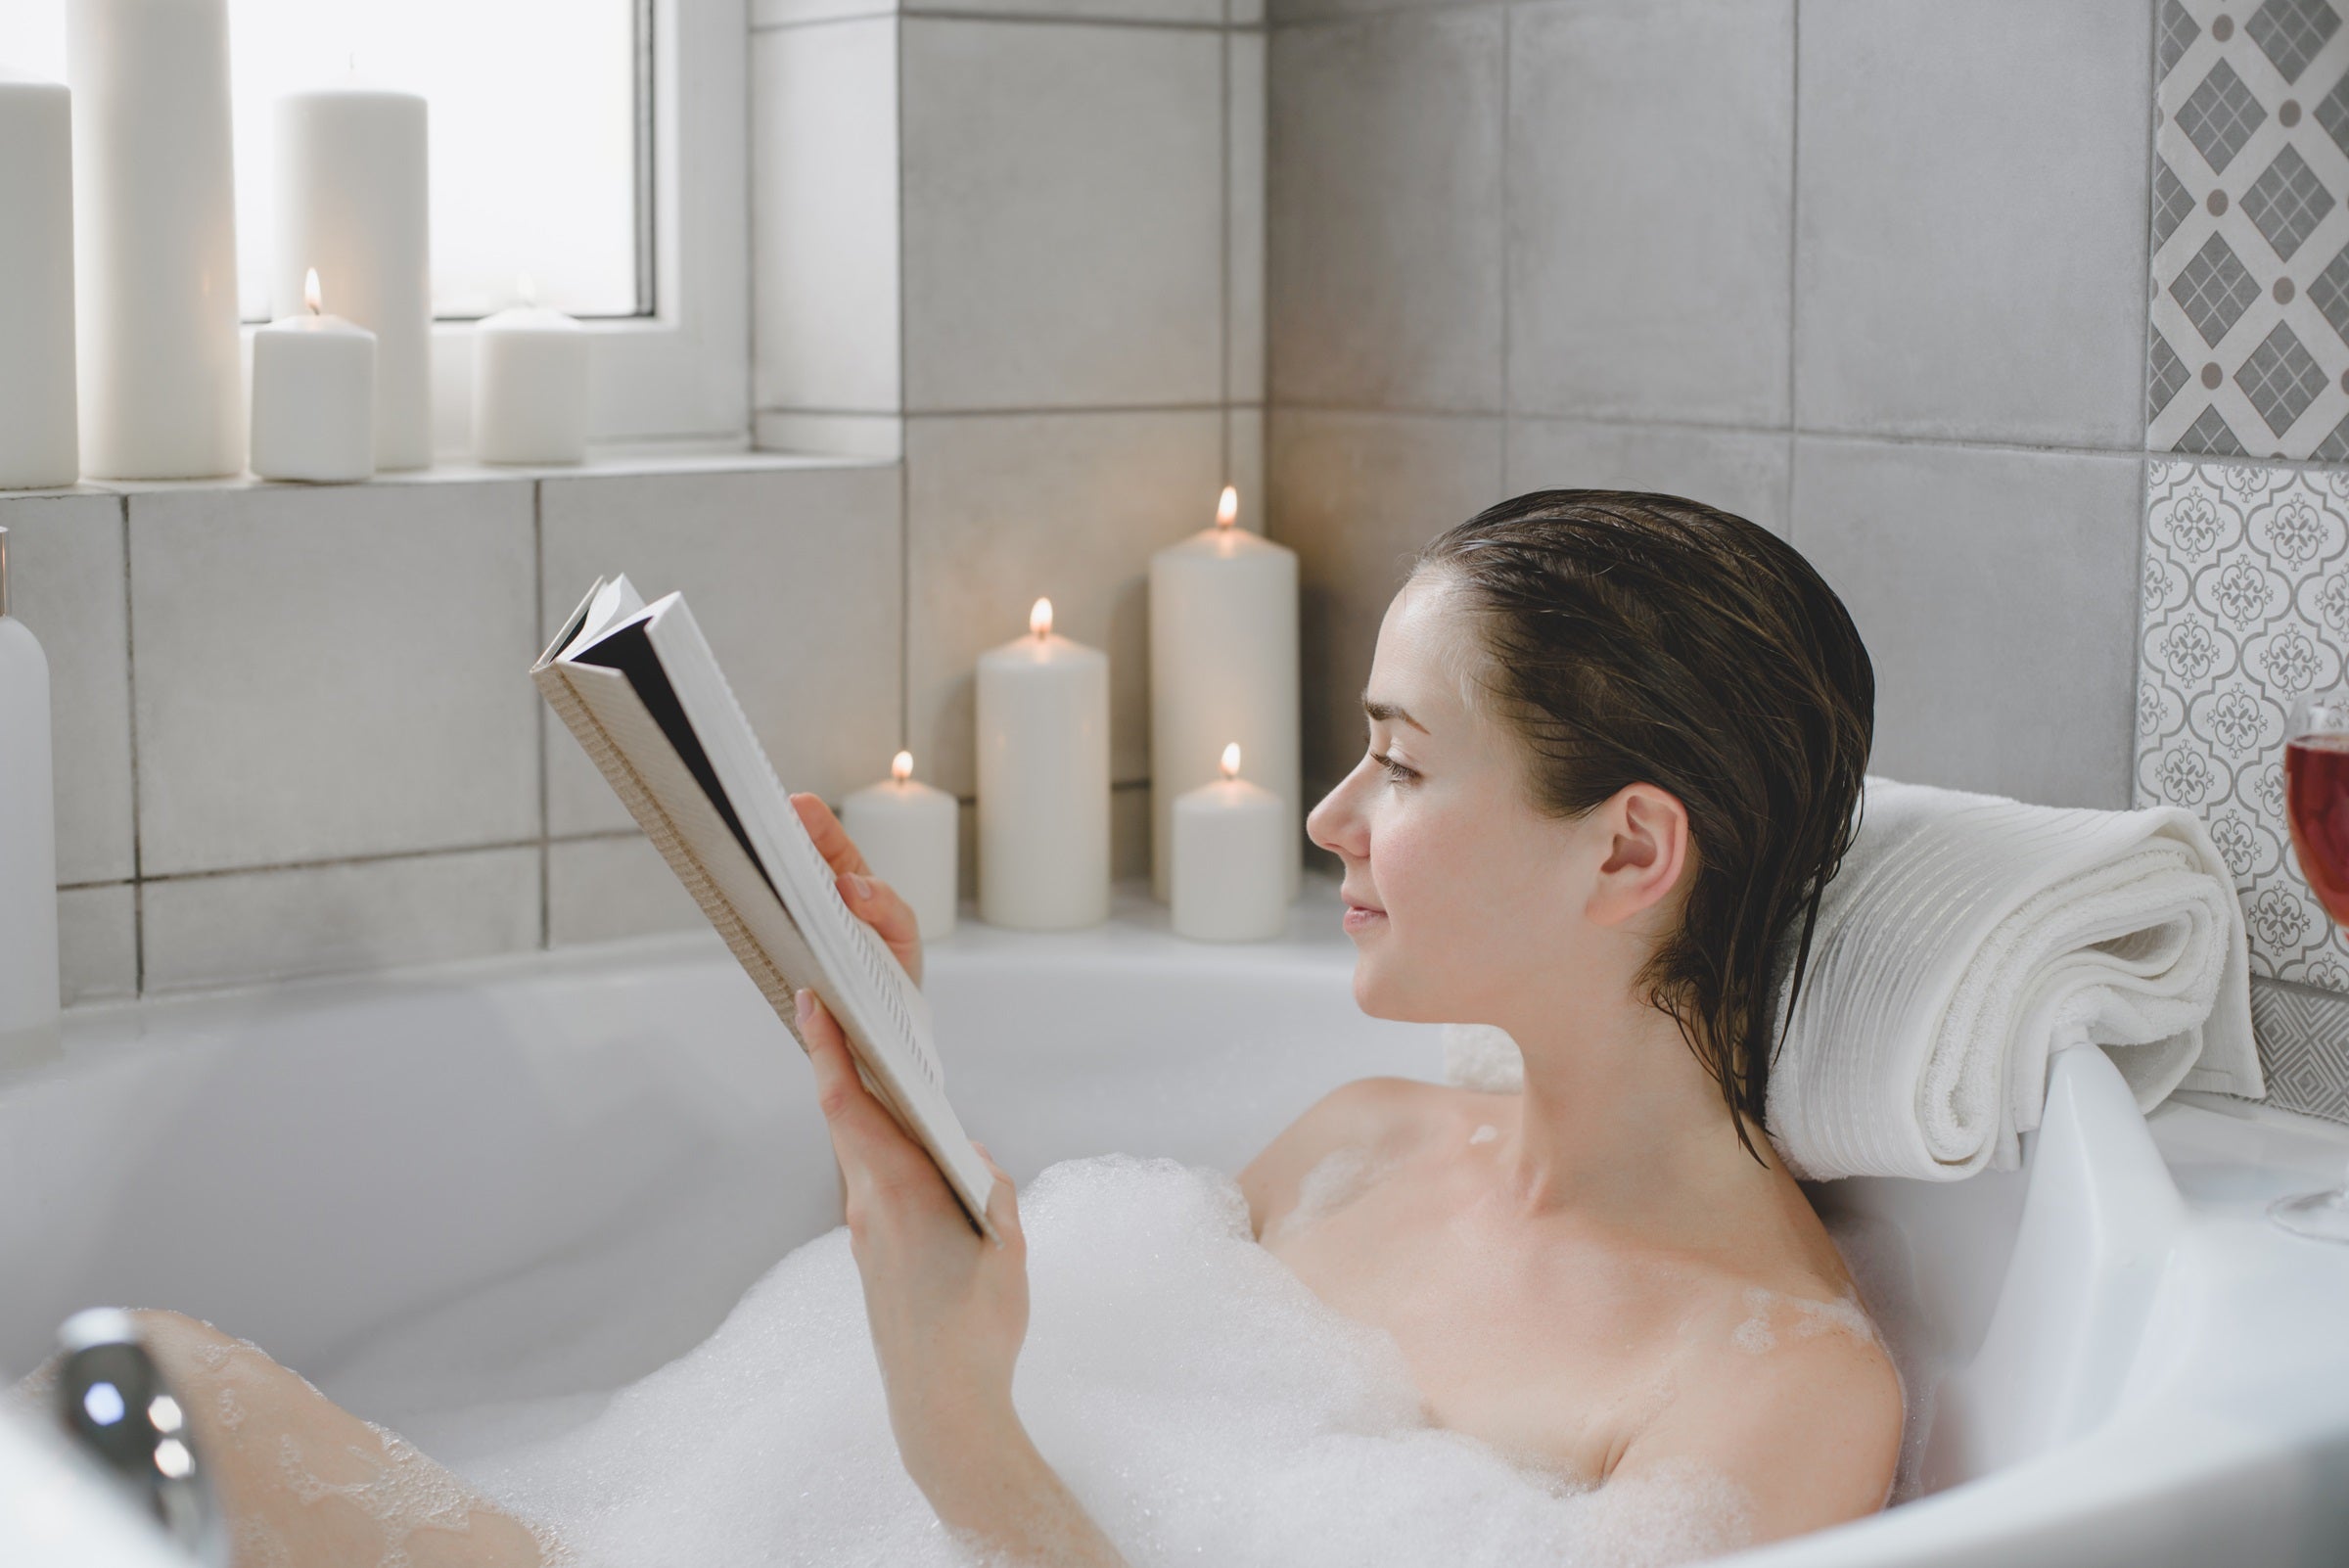 Things To Do in the Bath for Those Who Get Easily Bored